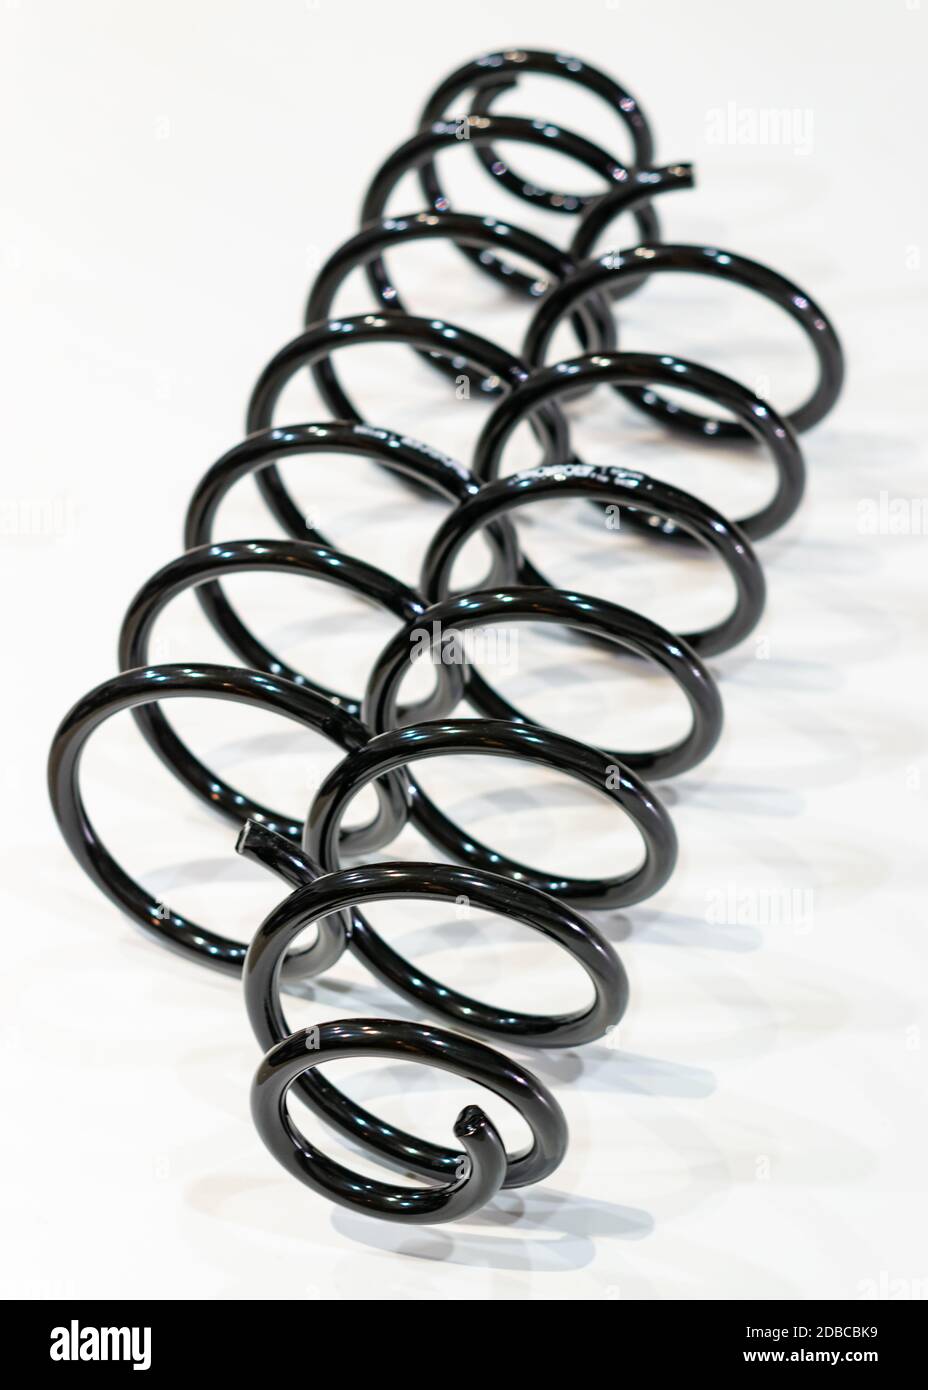 Monroe front springs car parts Stock Photo